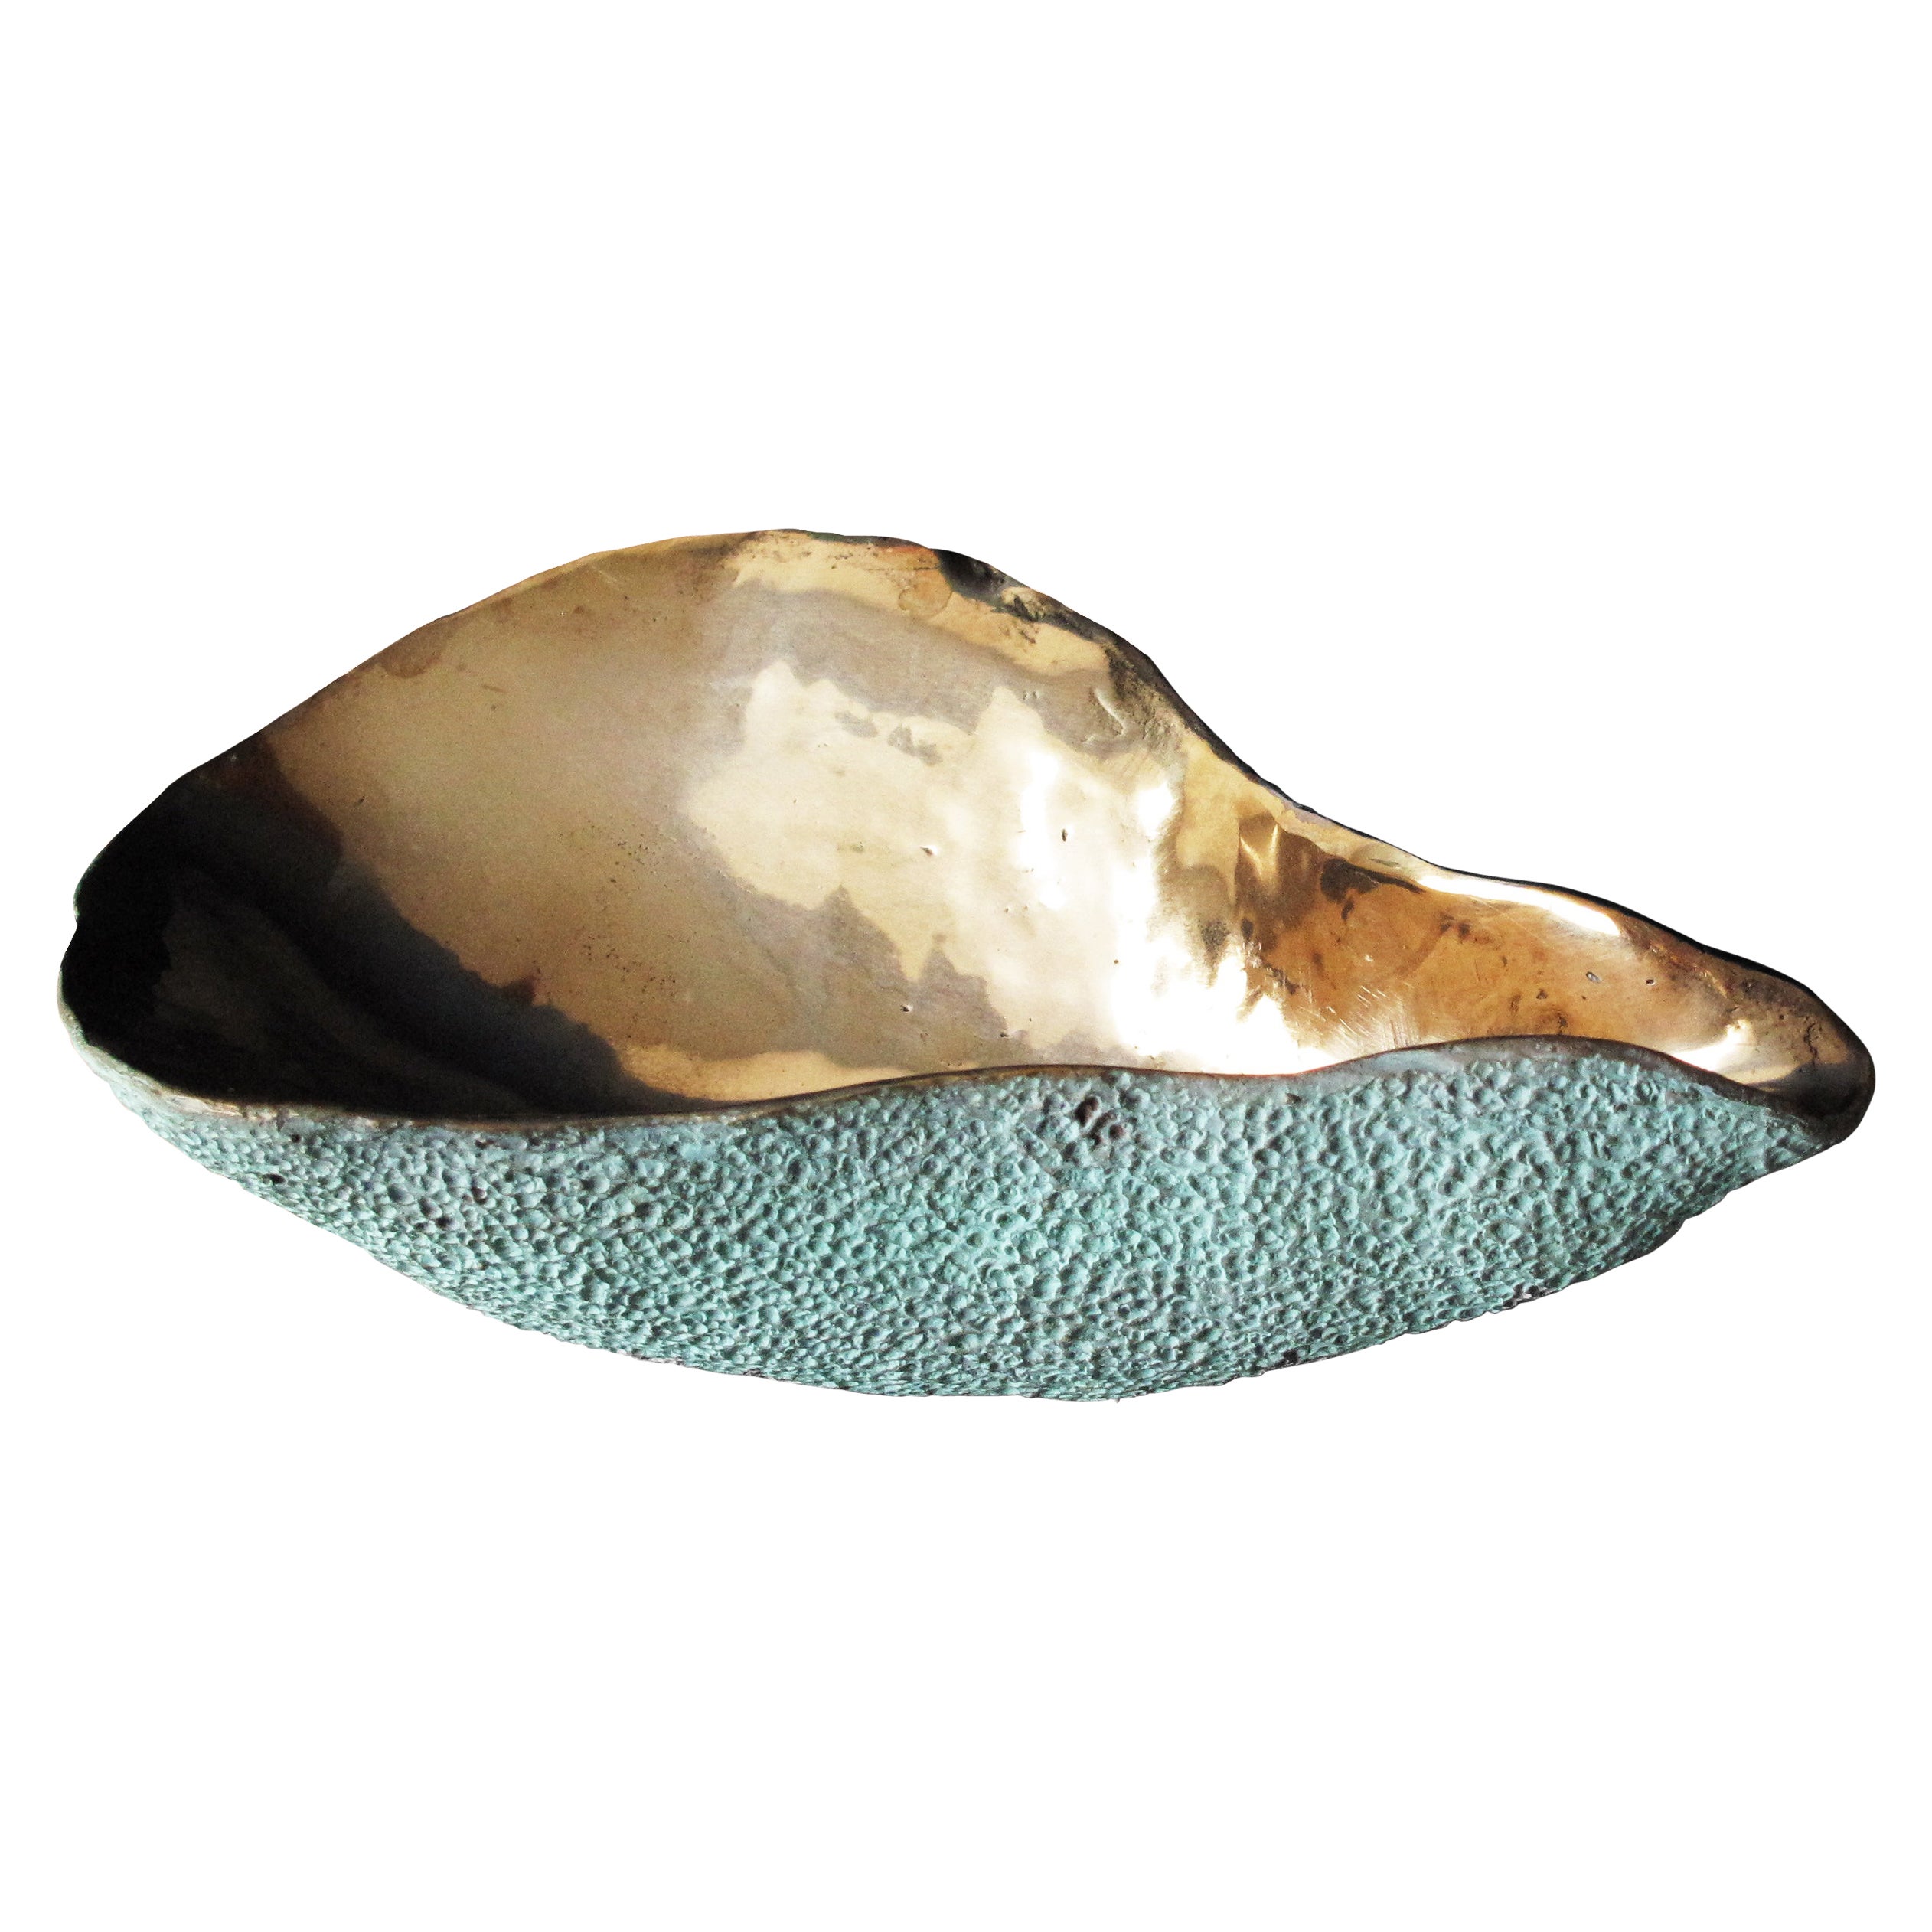 Oyster / Massive Handcasted Bronze Decorative Piece / Paper Weight